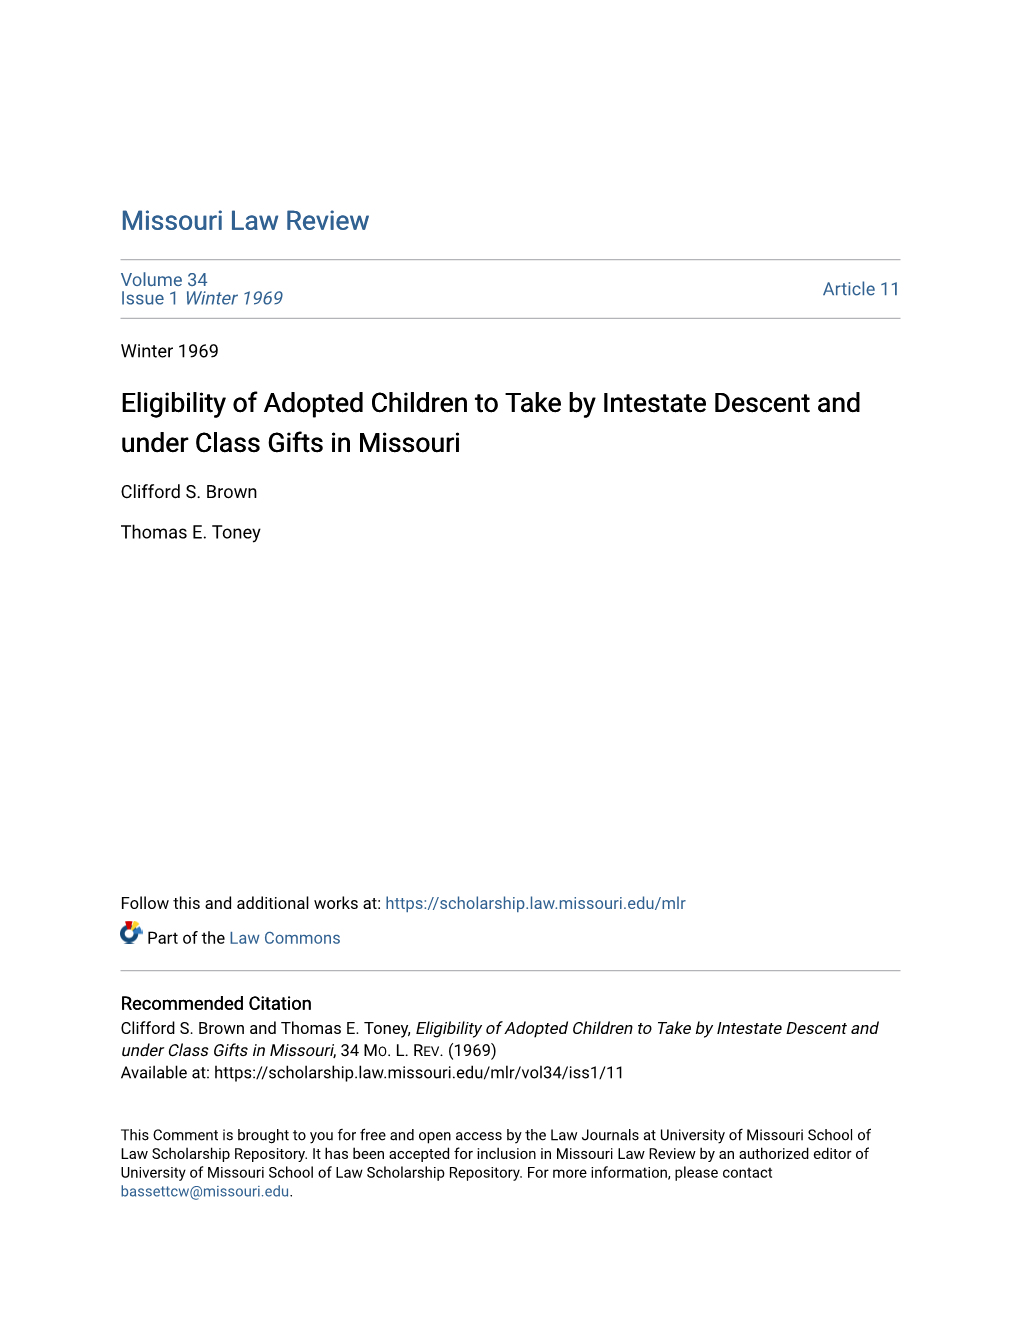 Eligibility of Adopted Children to Take by Intestate Descent and Under Class Gifts in Missouri